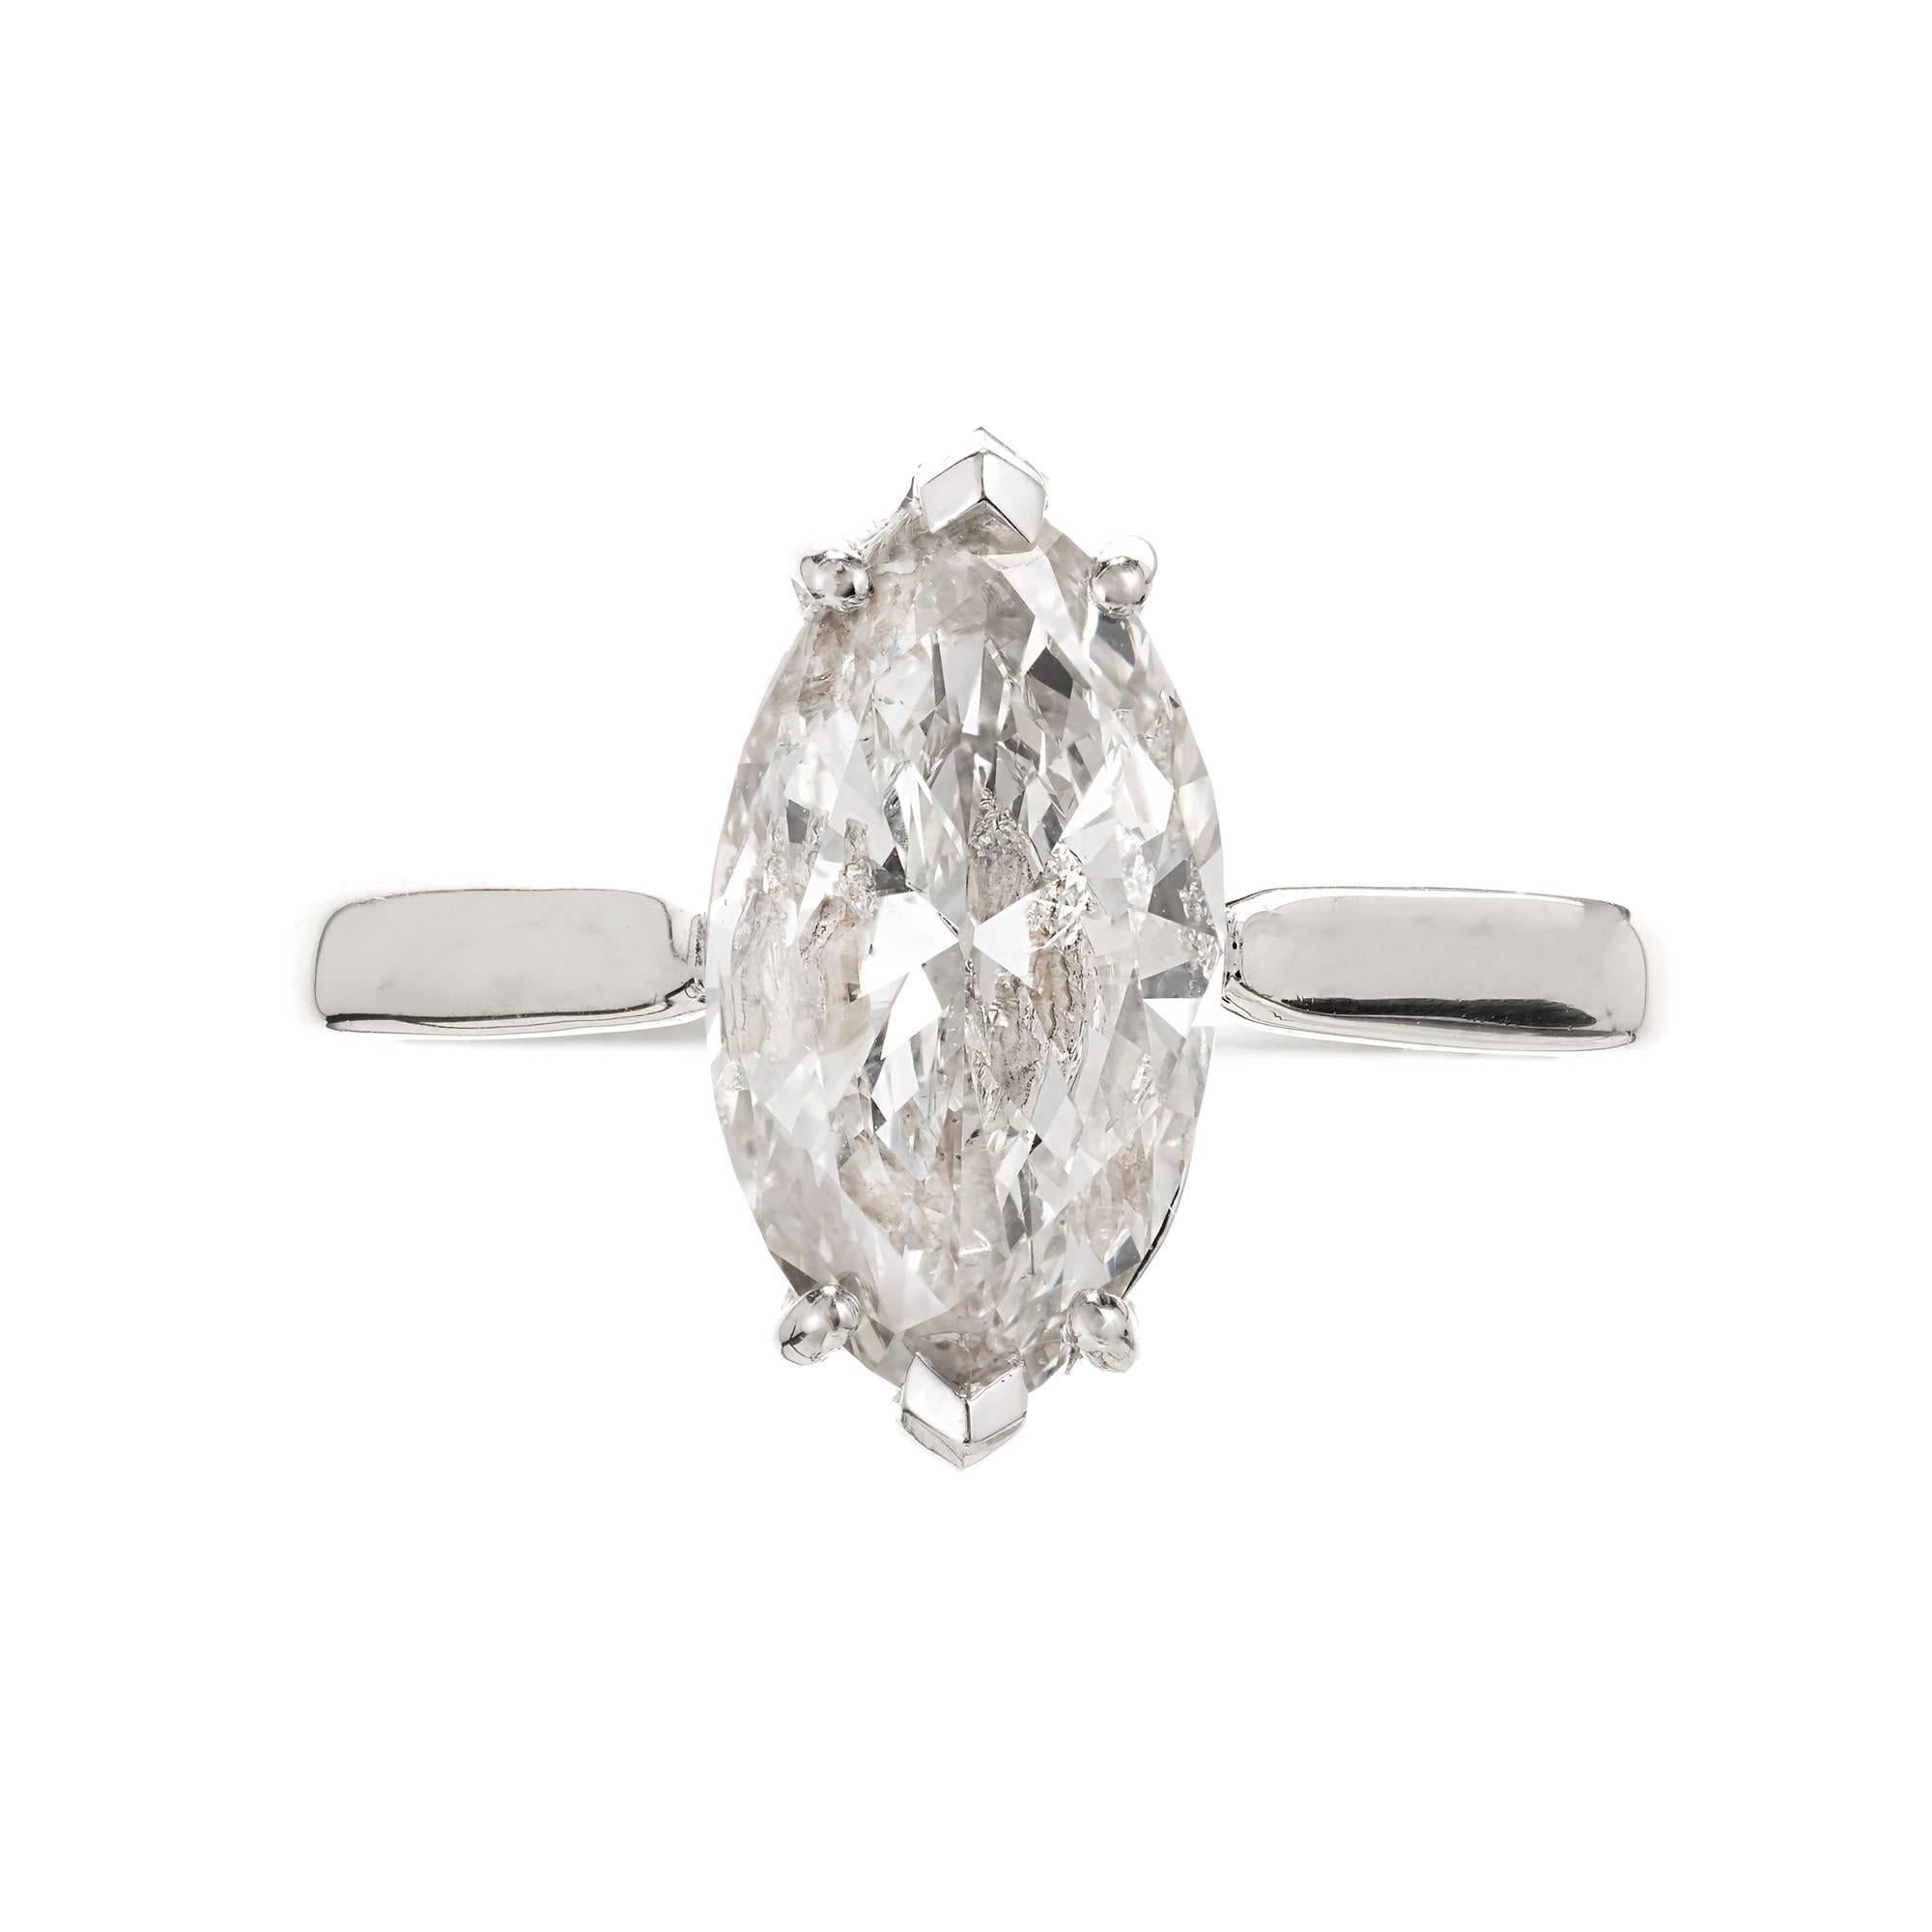 Peter Suchy Marquise Platinum Diamond solitaire engagement ring. Simple classic 4 prong V top solitaire designed to let a wedding band sit close to the Diamond and allow light through the Diamond.  

1 Marquise Diamond, approx. total weight 3.07cts,